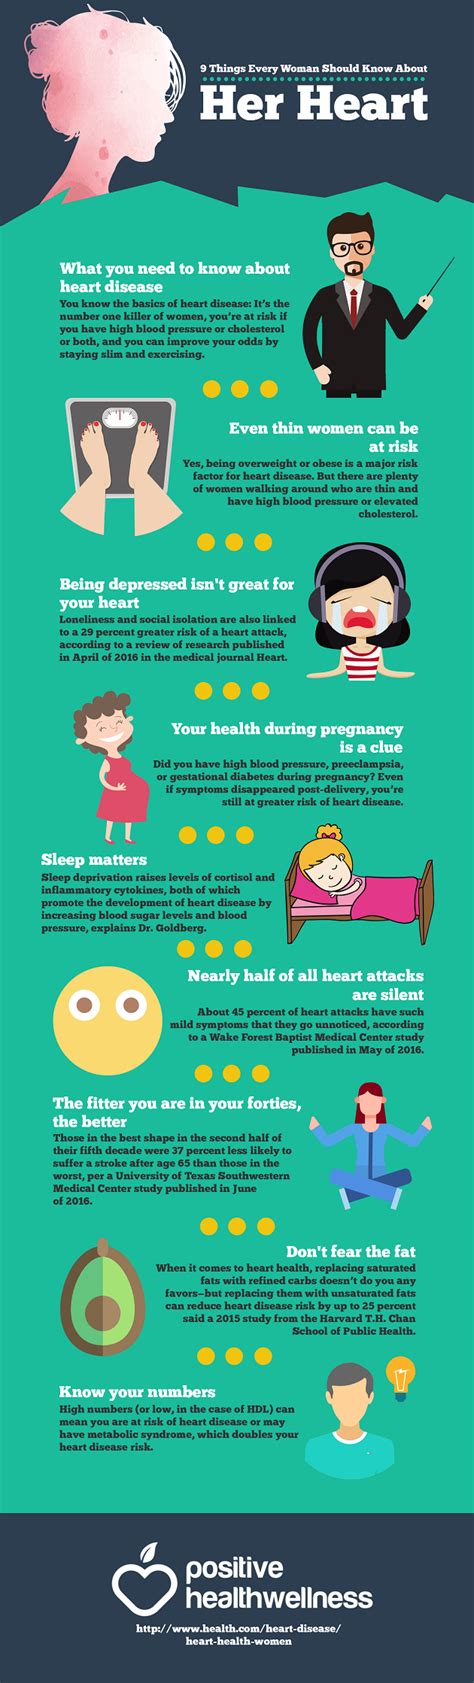 9 things every woman should know about her heart positive health wellness infographic heart